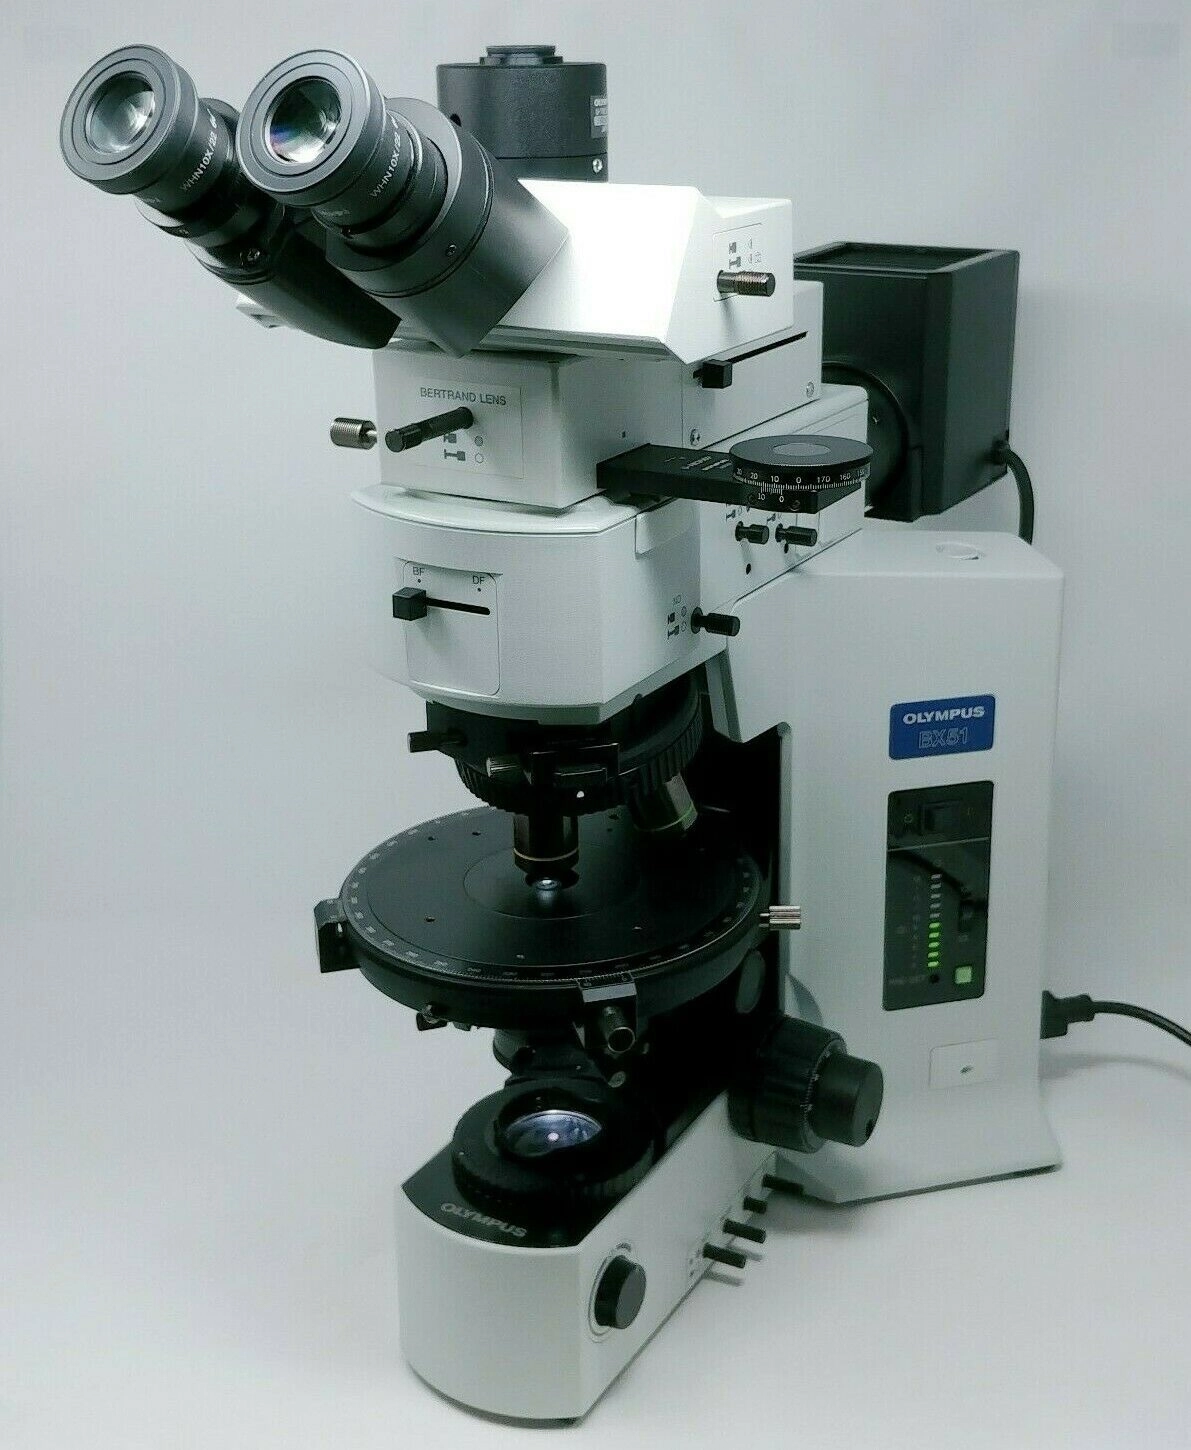 Olympus Microscope BX51 Pol Polarizing with Bertrand Lens and BF/DF